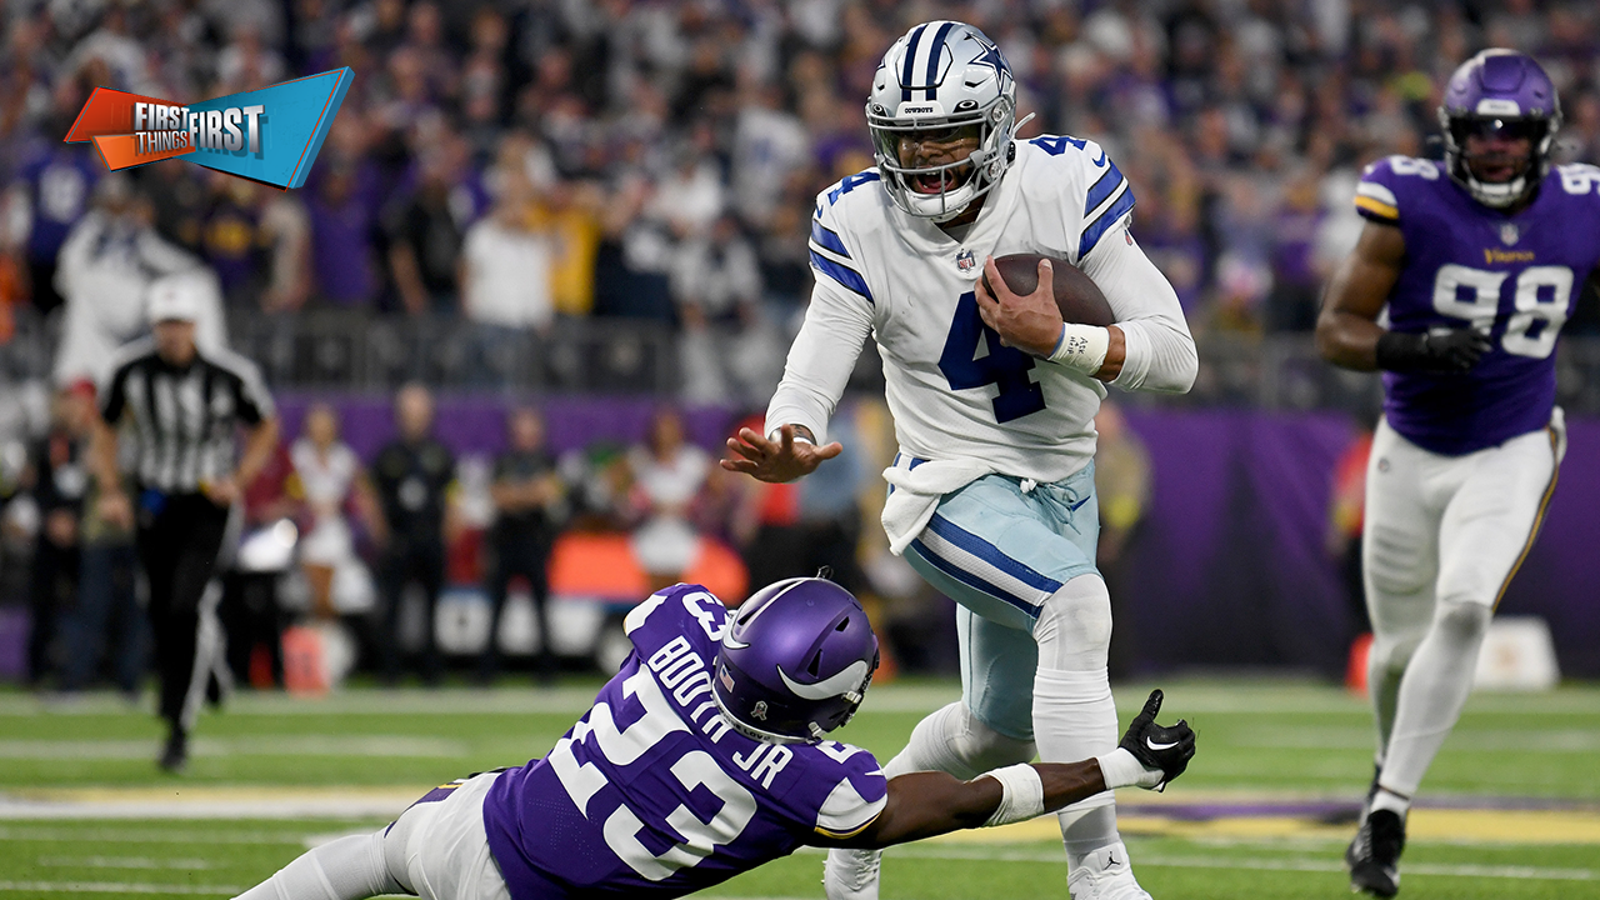 Are Cowboys a Super Bowl team after 40-3 win over Vikings?